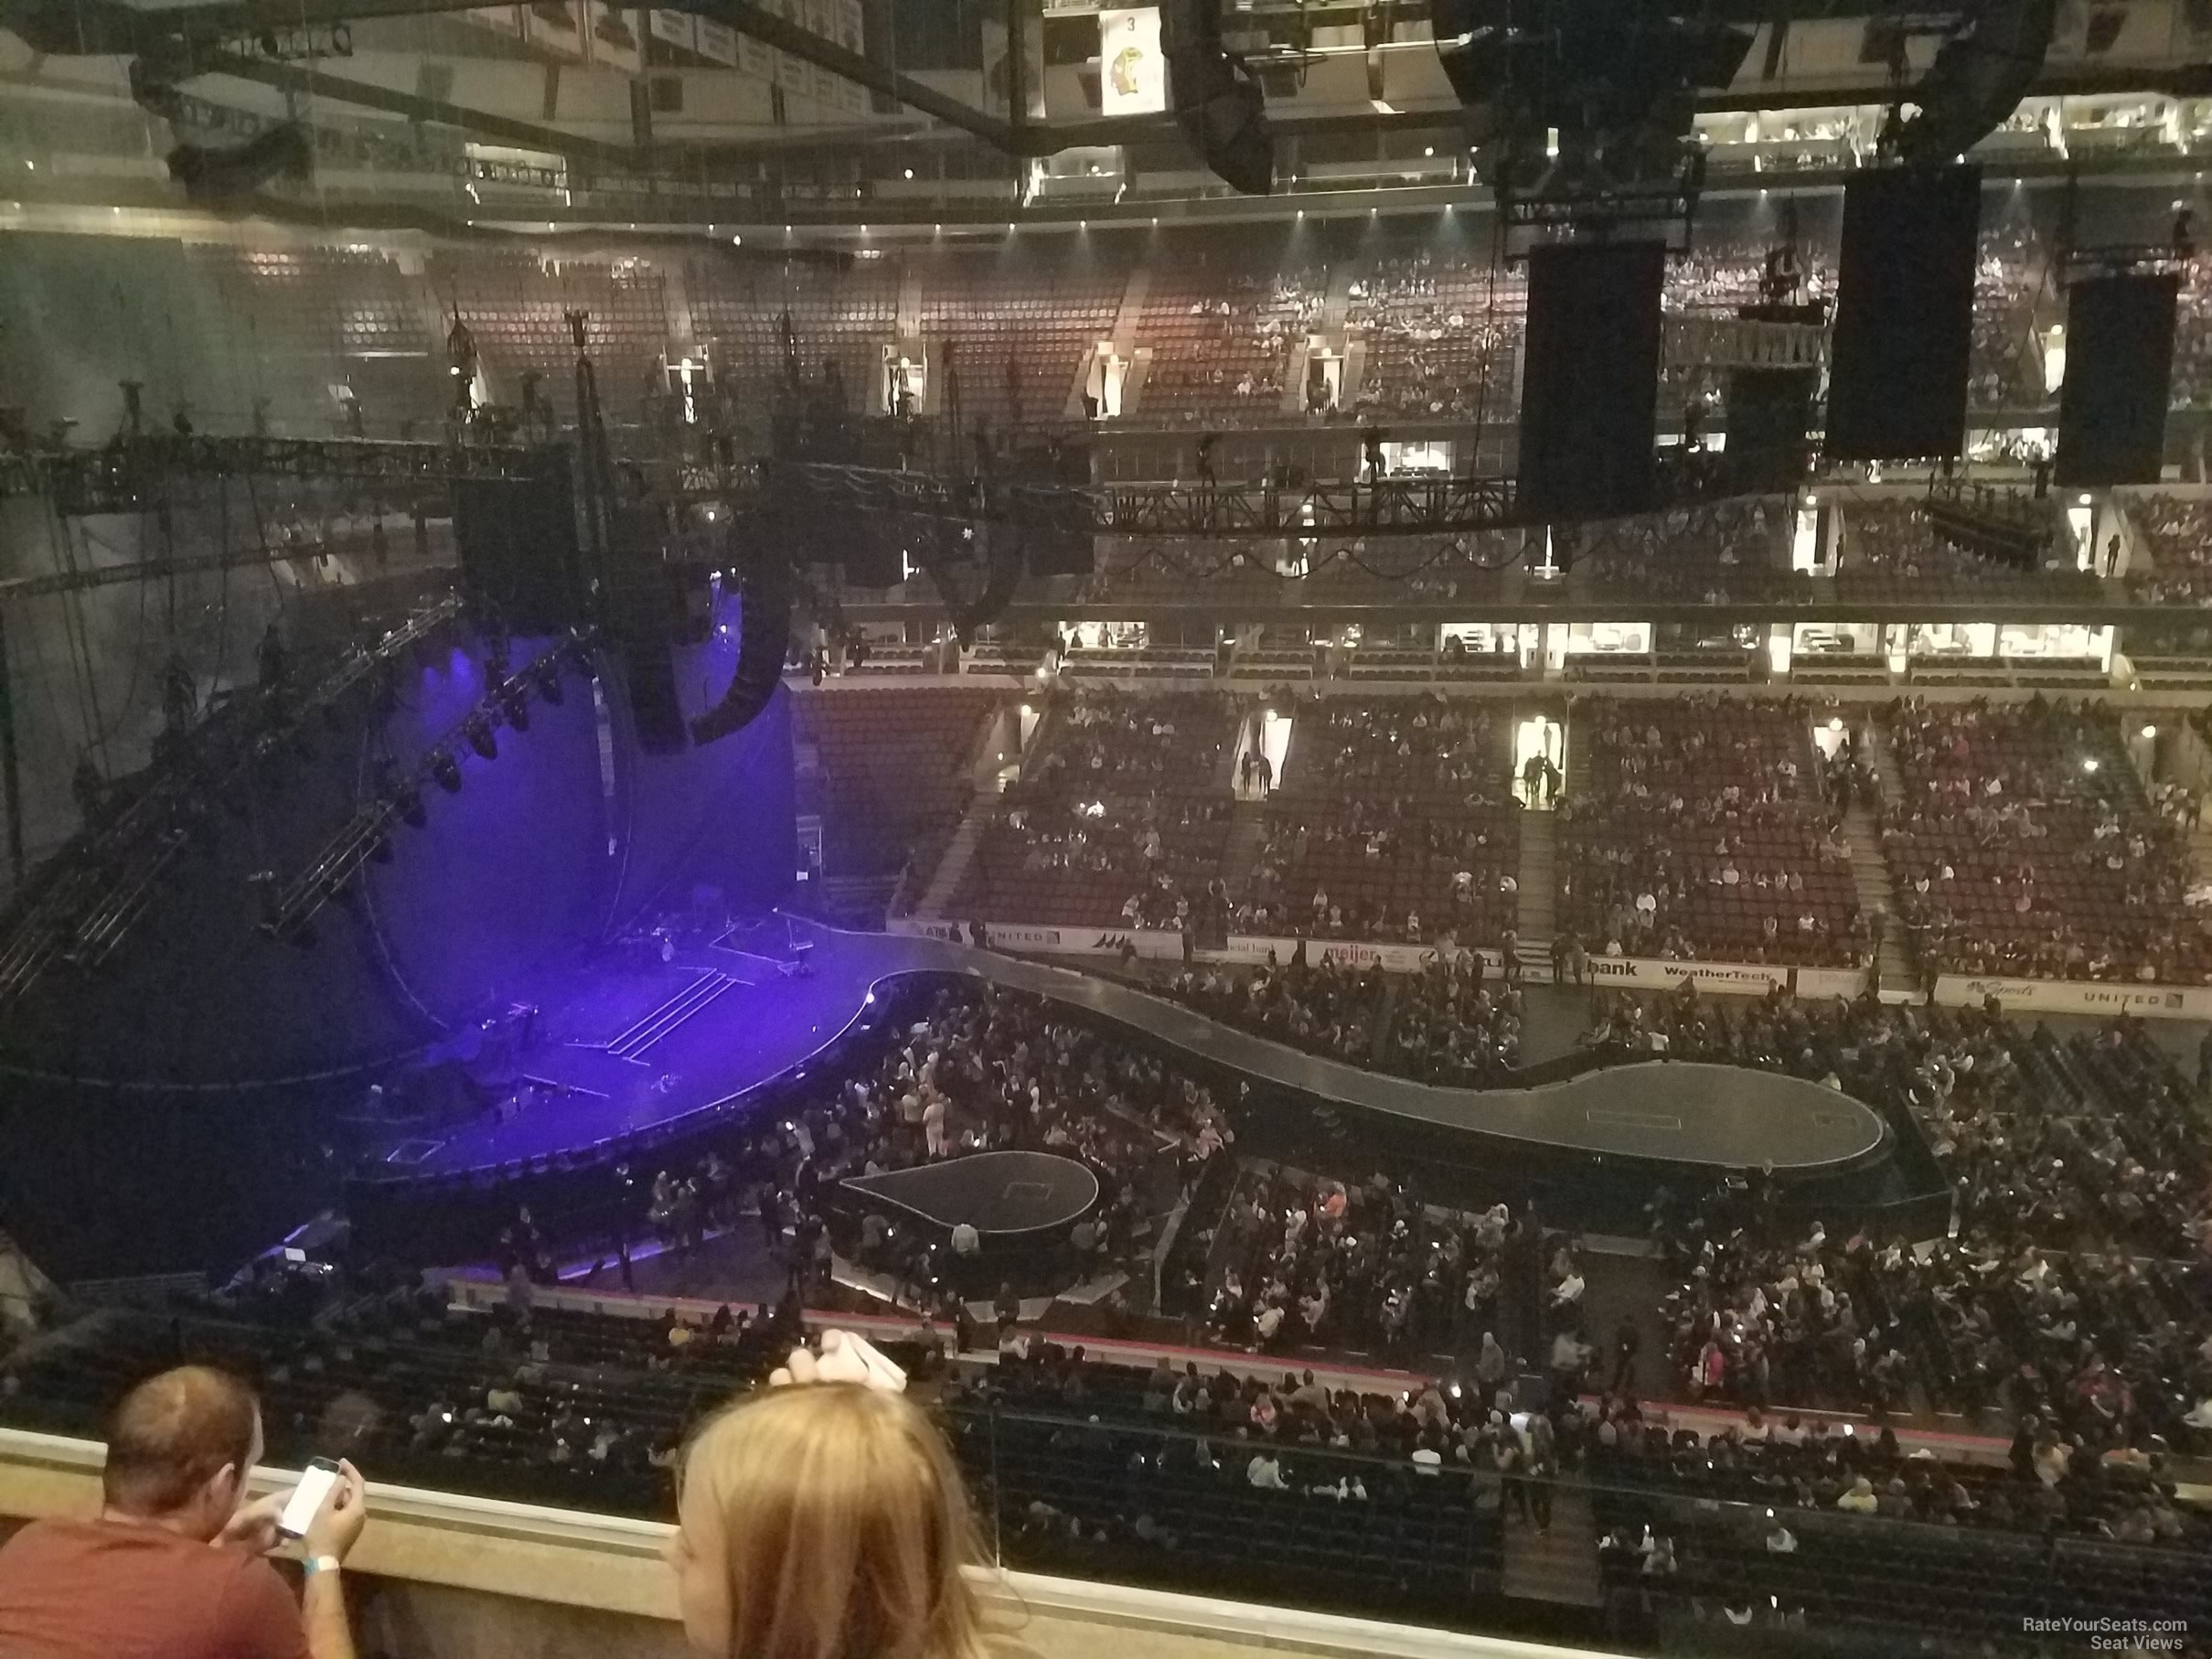 section 318, row 4 seat view  for concert - united center